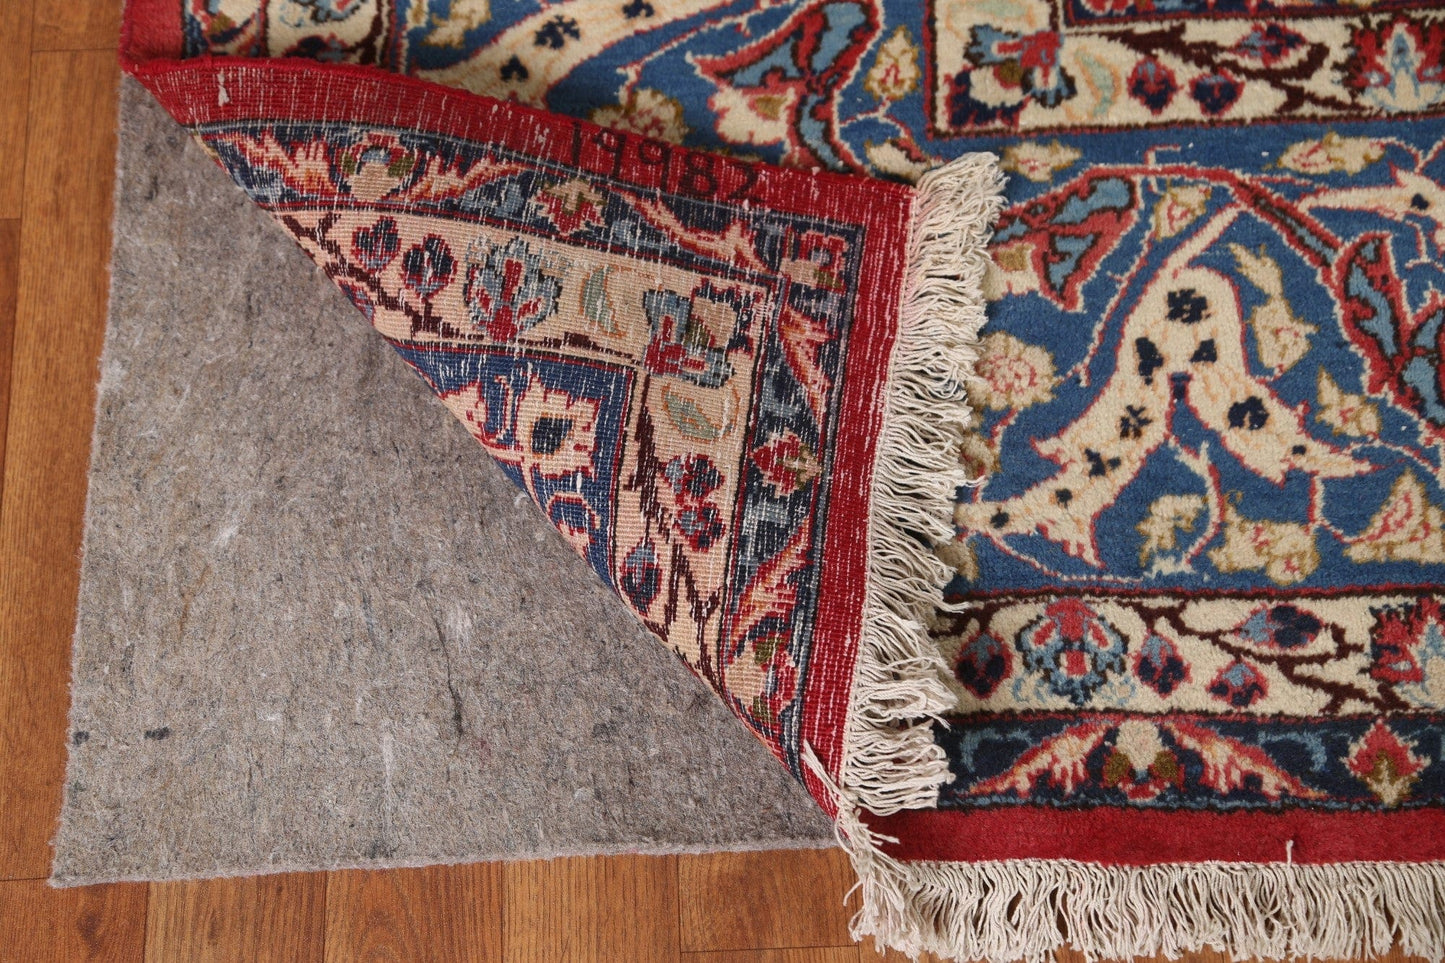 Antique Vegetable Dye Isfahan Persian Large Rug 10x15